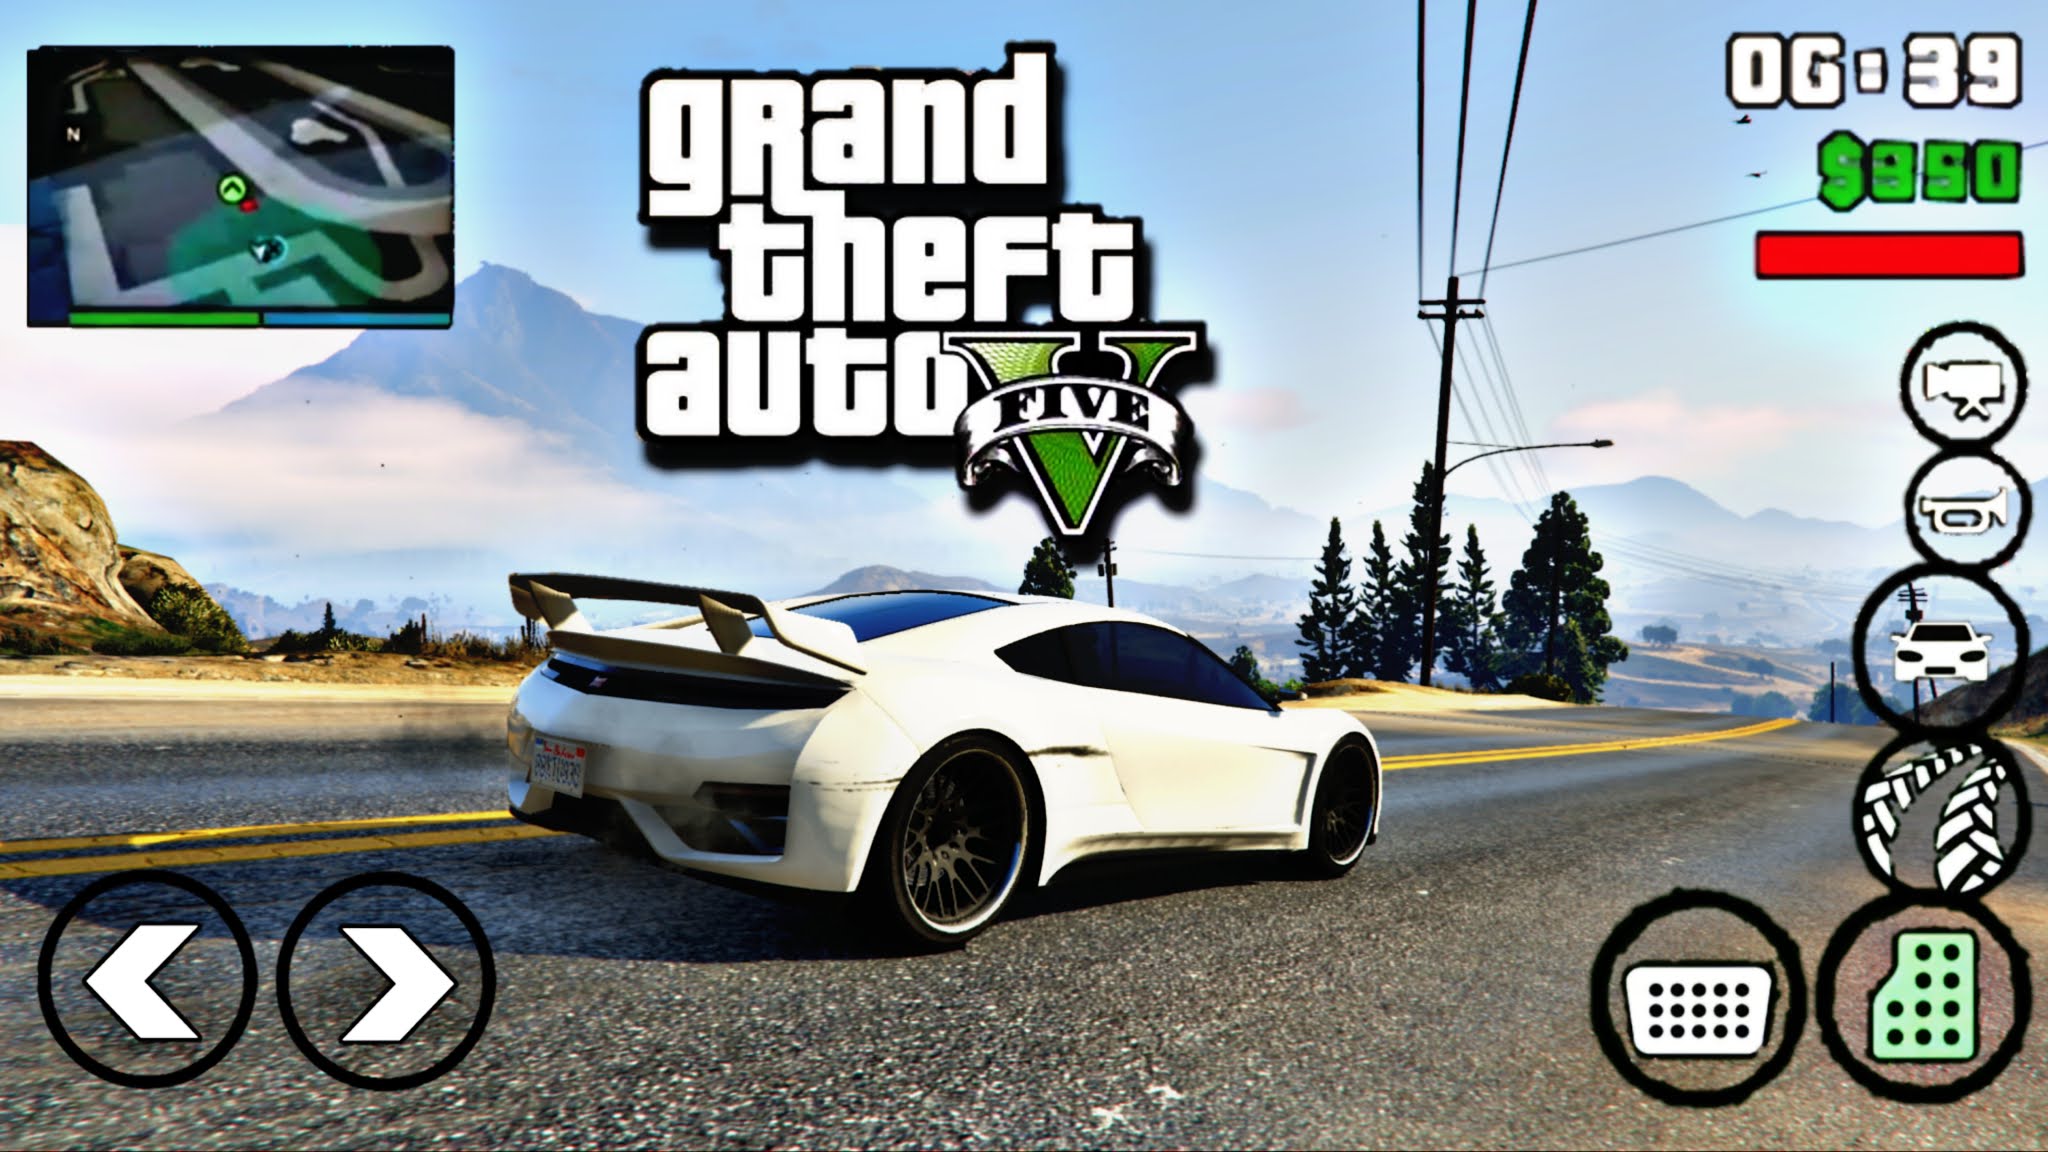 How To Download GTA 5 Beta On Android No Verification 2021 D